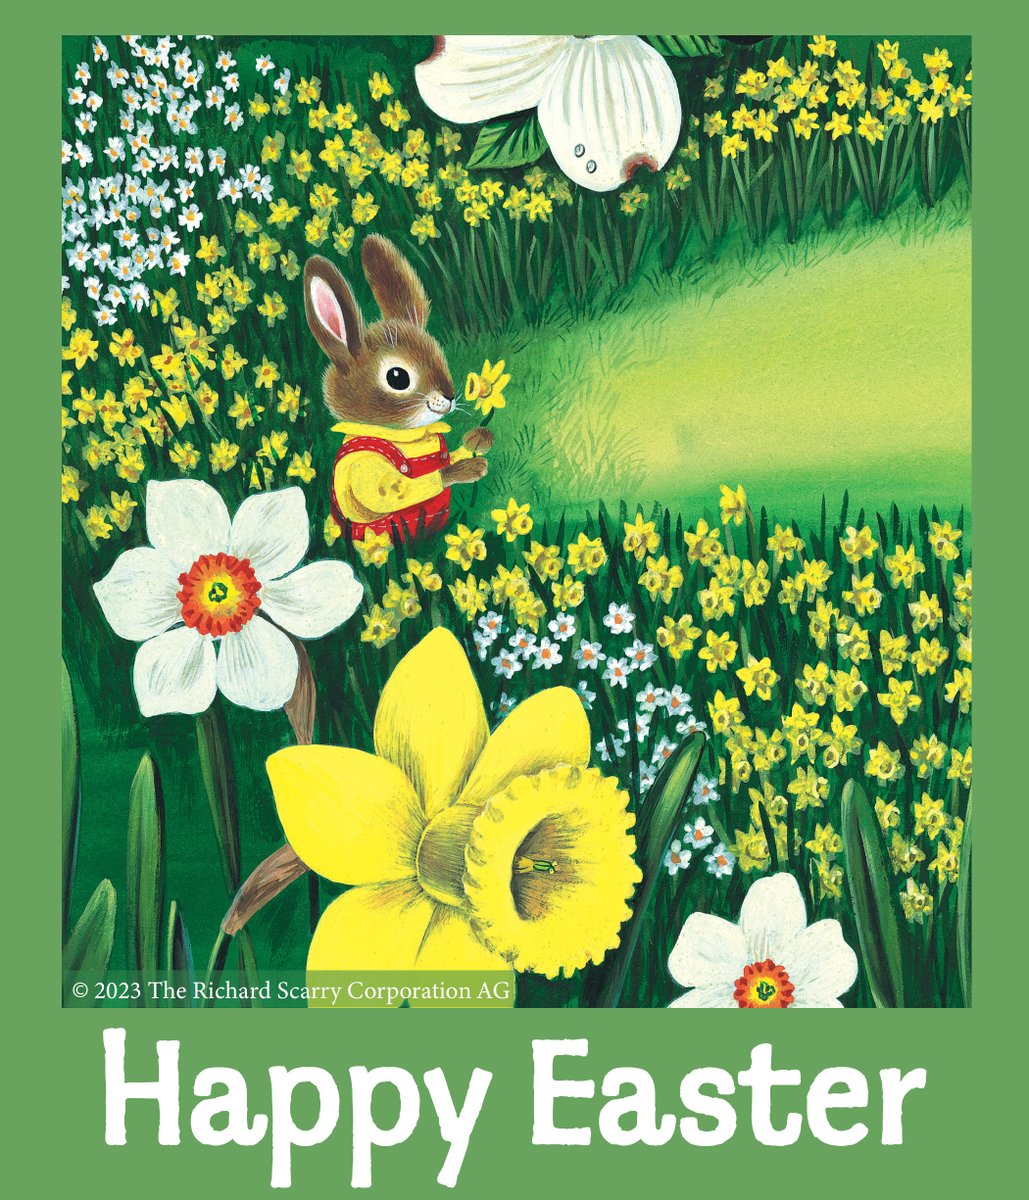 Happy Easter to all who celebrate! The Fairfield Museum is open from 10 am – 4 pm today. Bring the whole family to see our exhibition, “The Road to Busytown: Richard Scarry’s Life in Fairfield County.' bit.ly/3xNBbh9 Illustration from Richard Scarry's 'I Am a Bunny.'